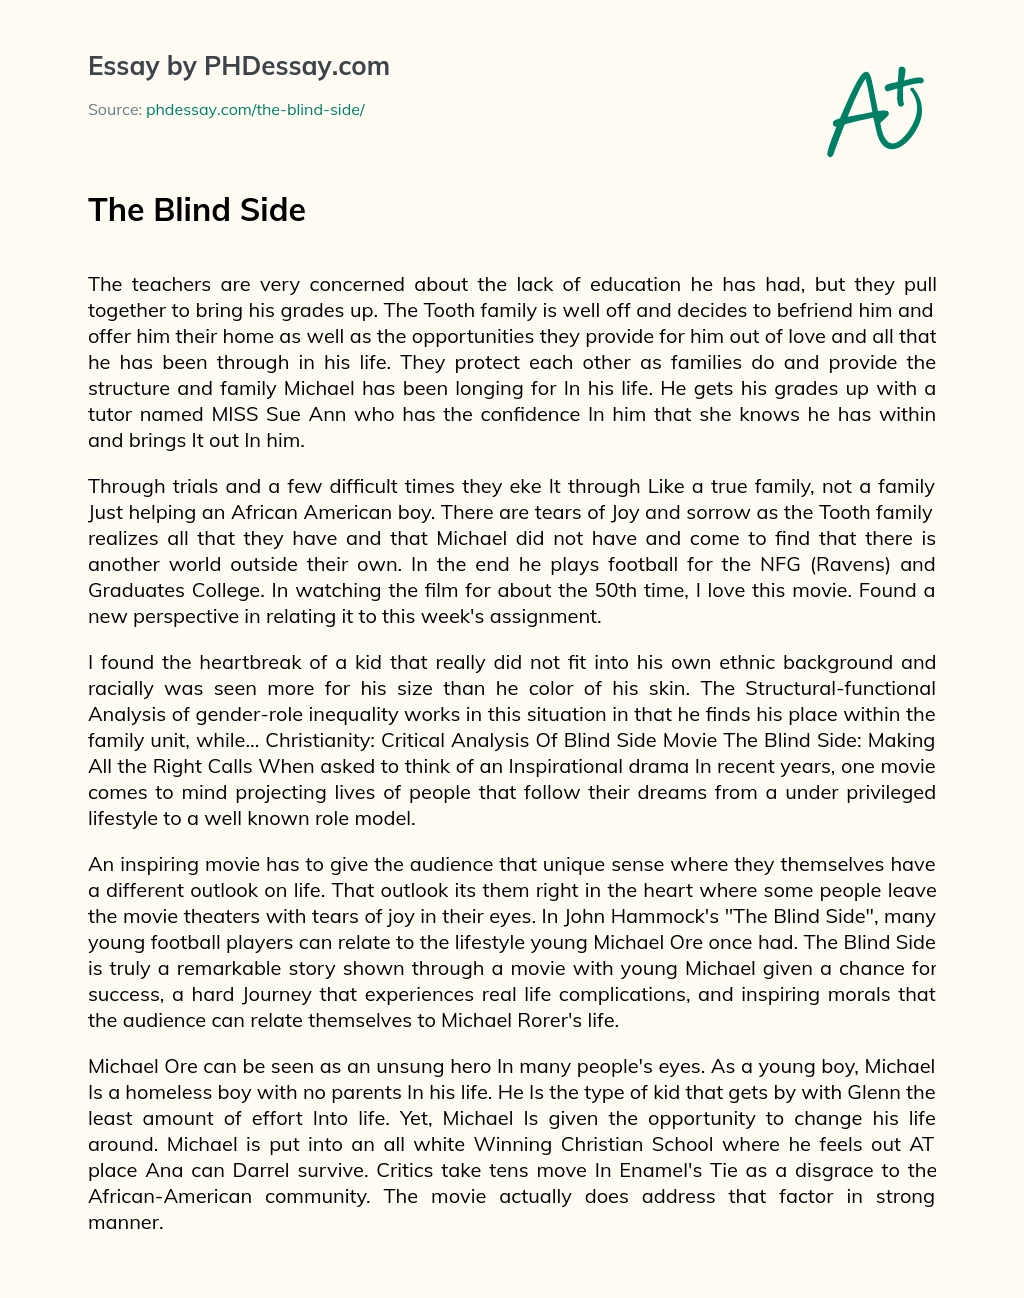 The Blind Side essay